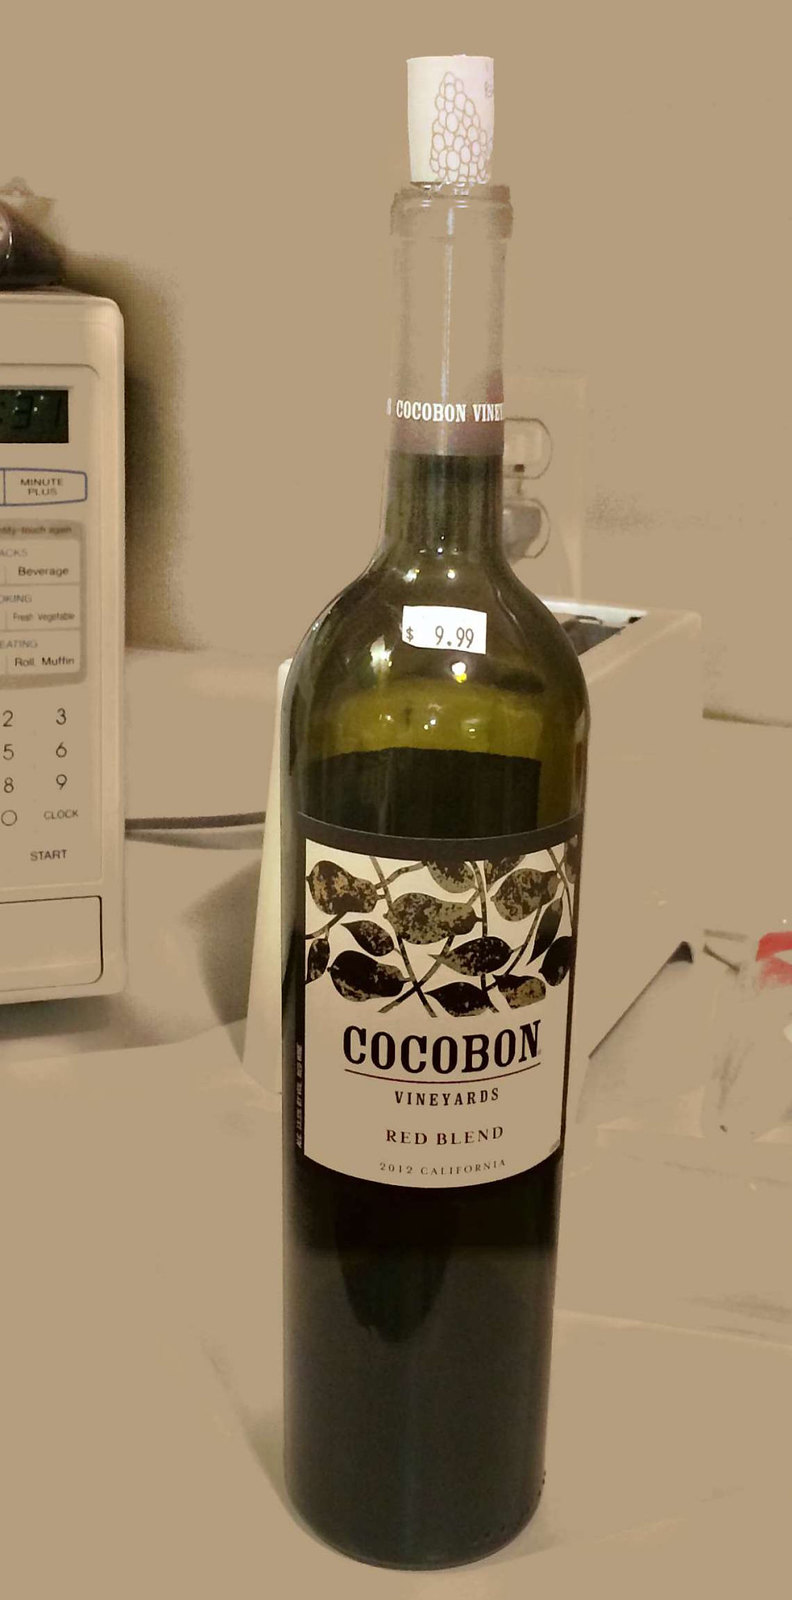 The Search for an Inexpensive Dinner Wine-Part 2 5